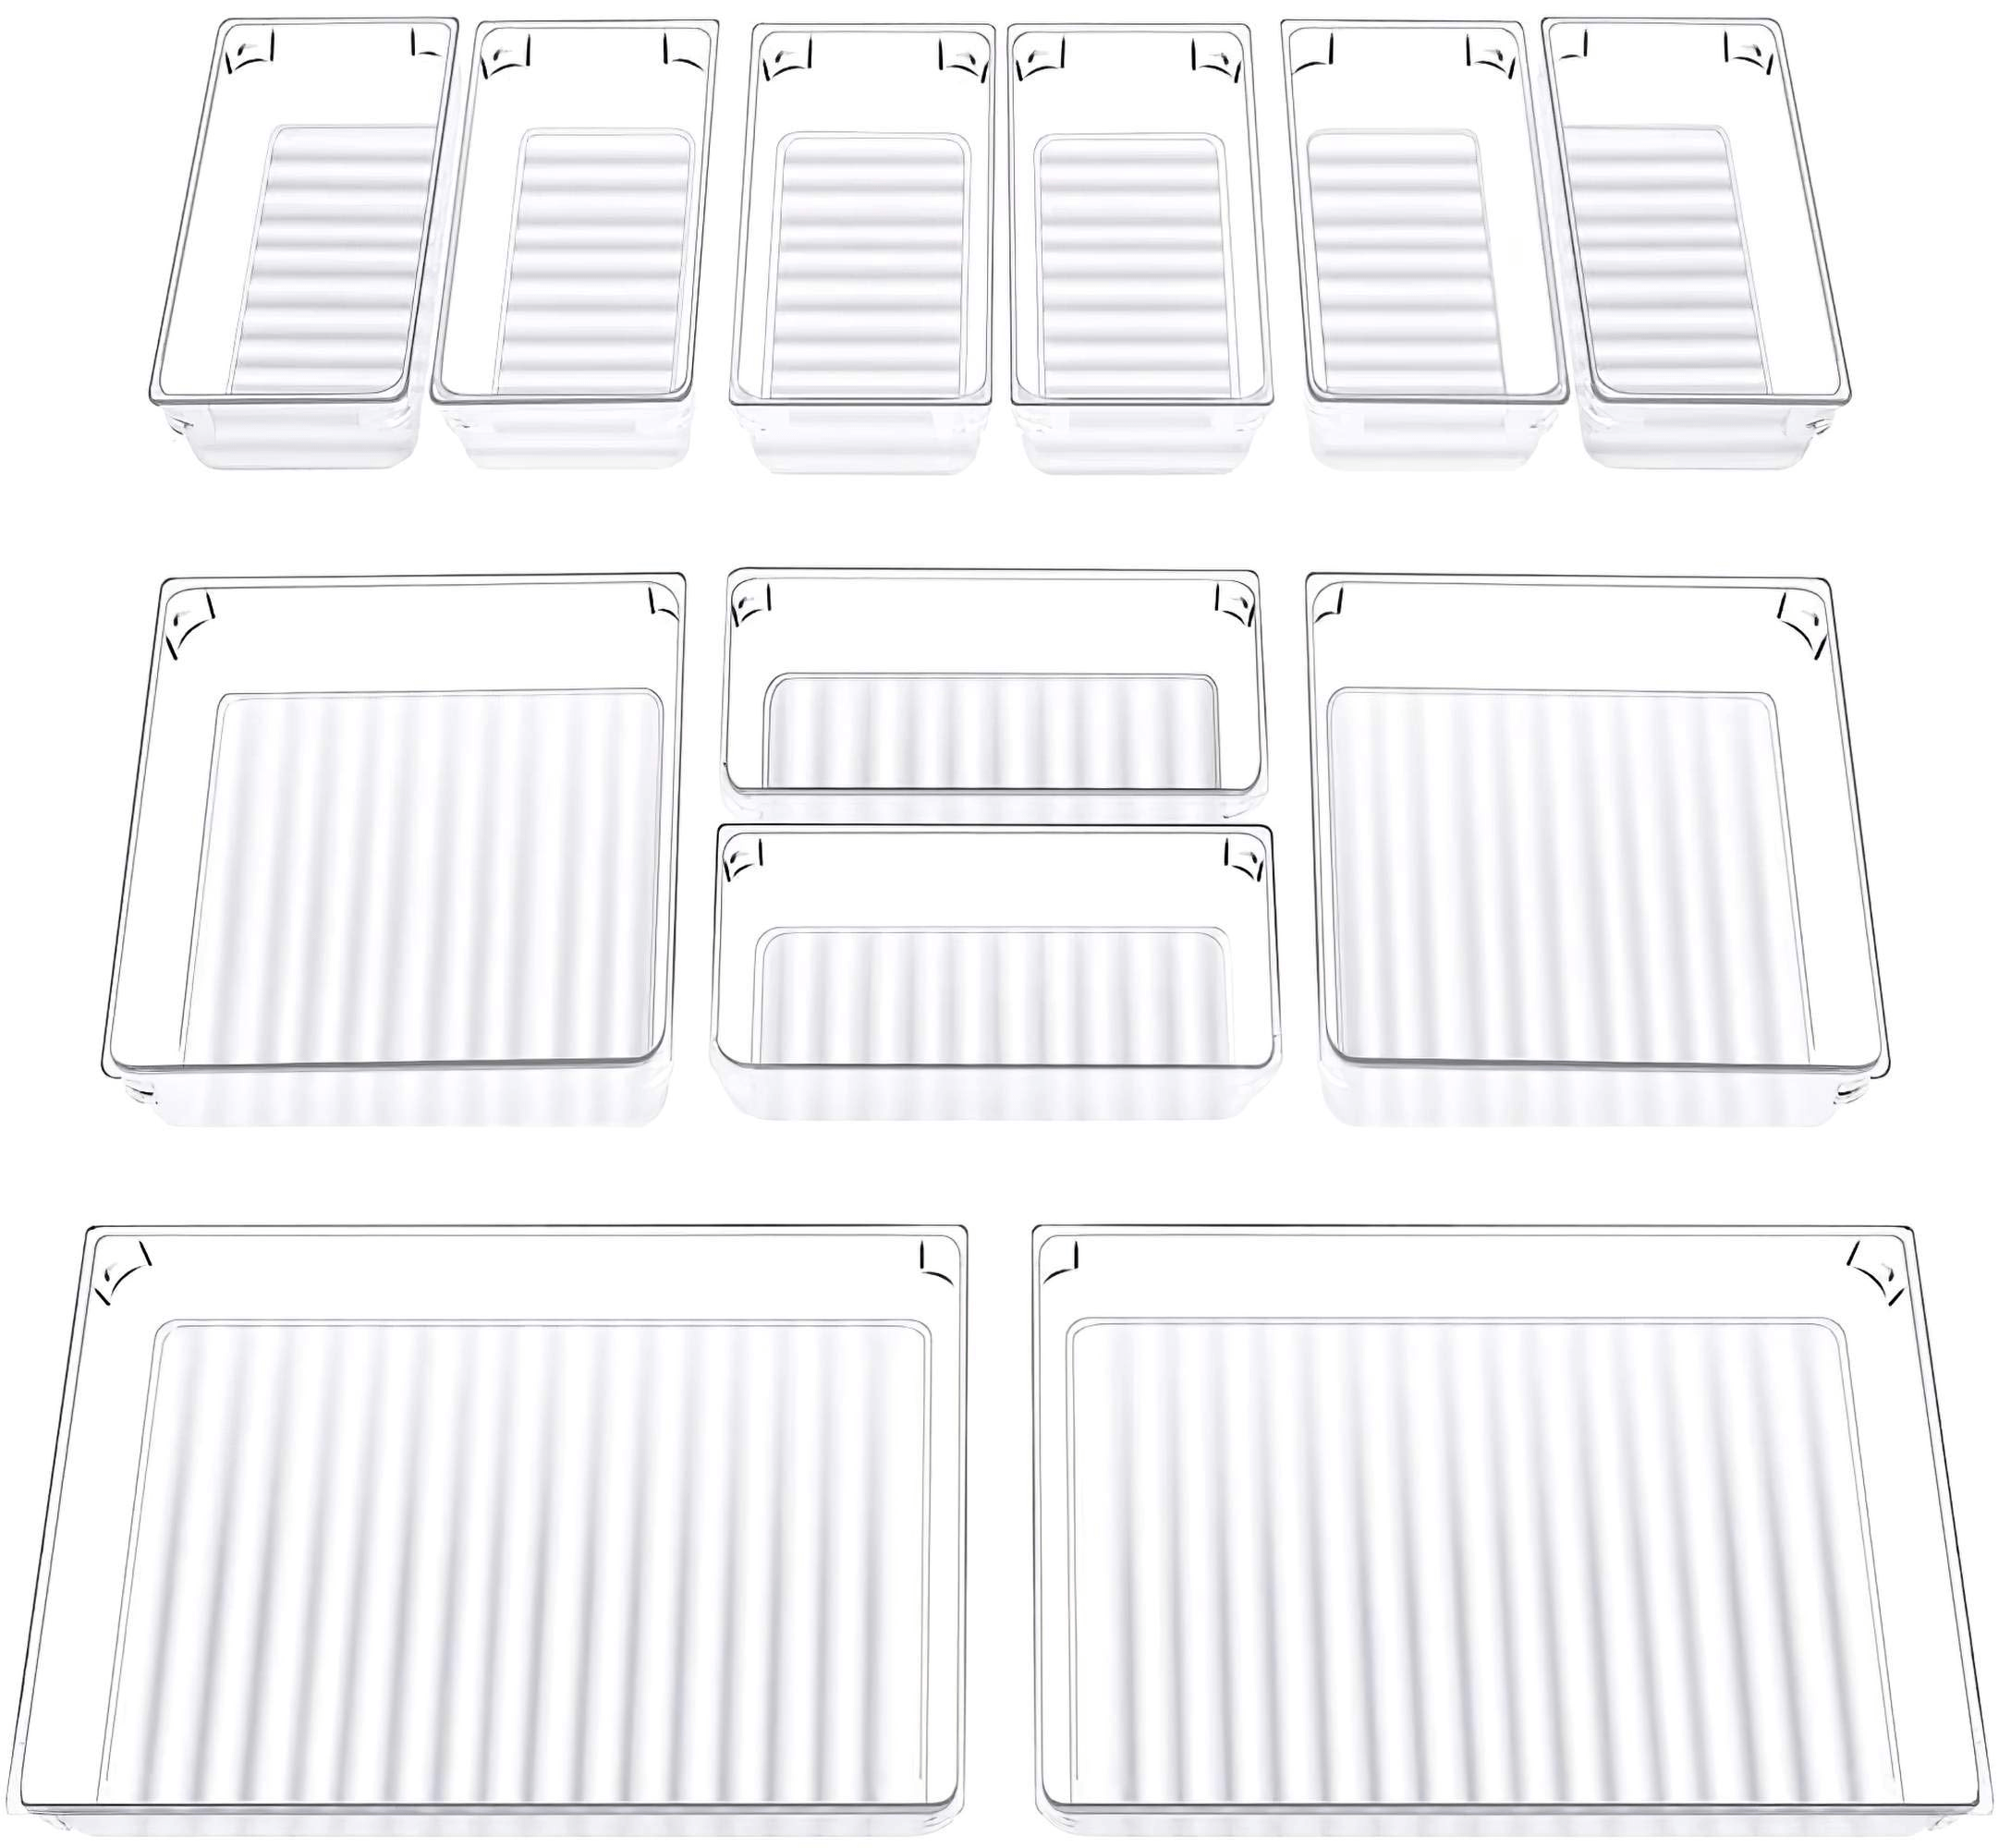 InnoGear Set of 12 Desk Drawer Organiser Trays with 3-Size Clear Plast